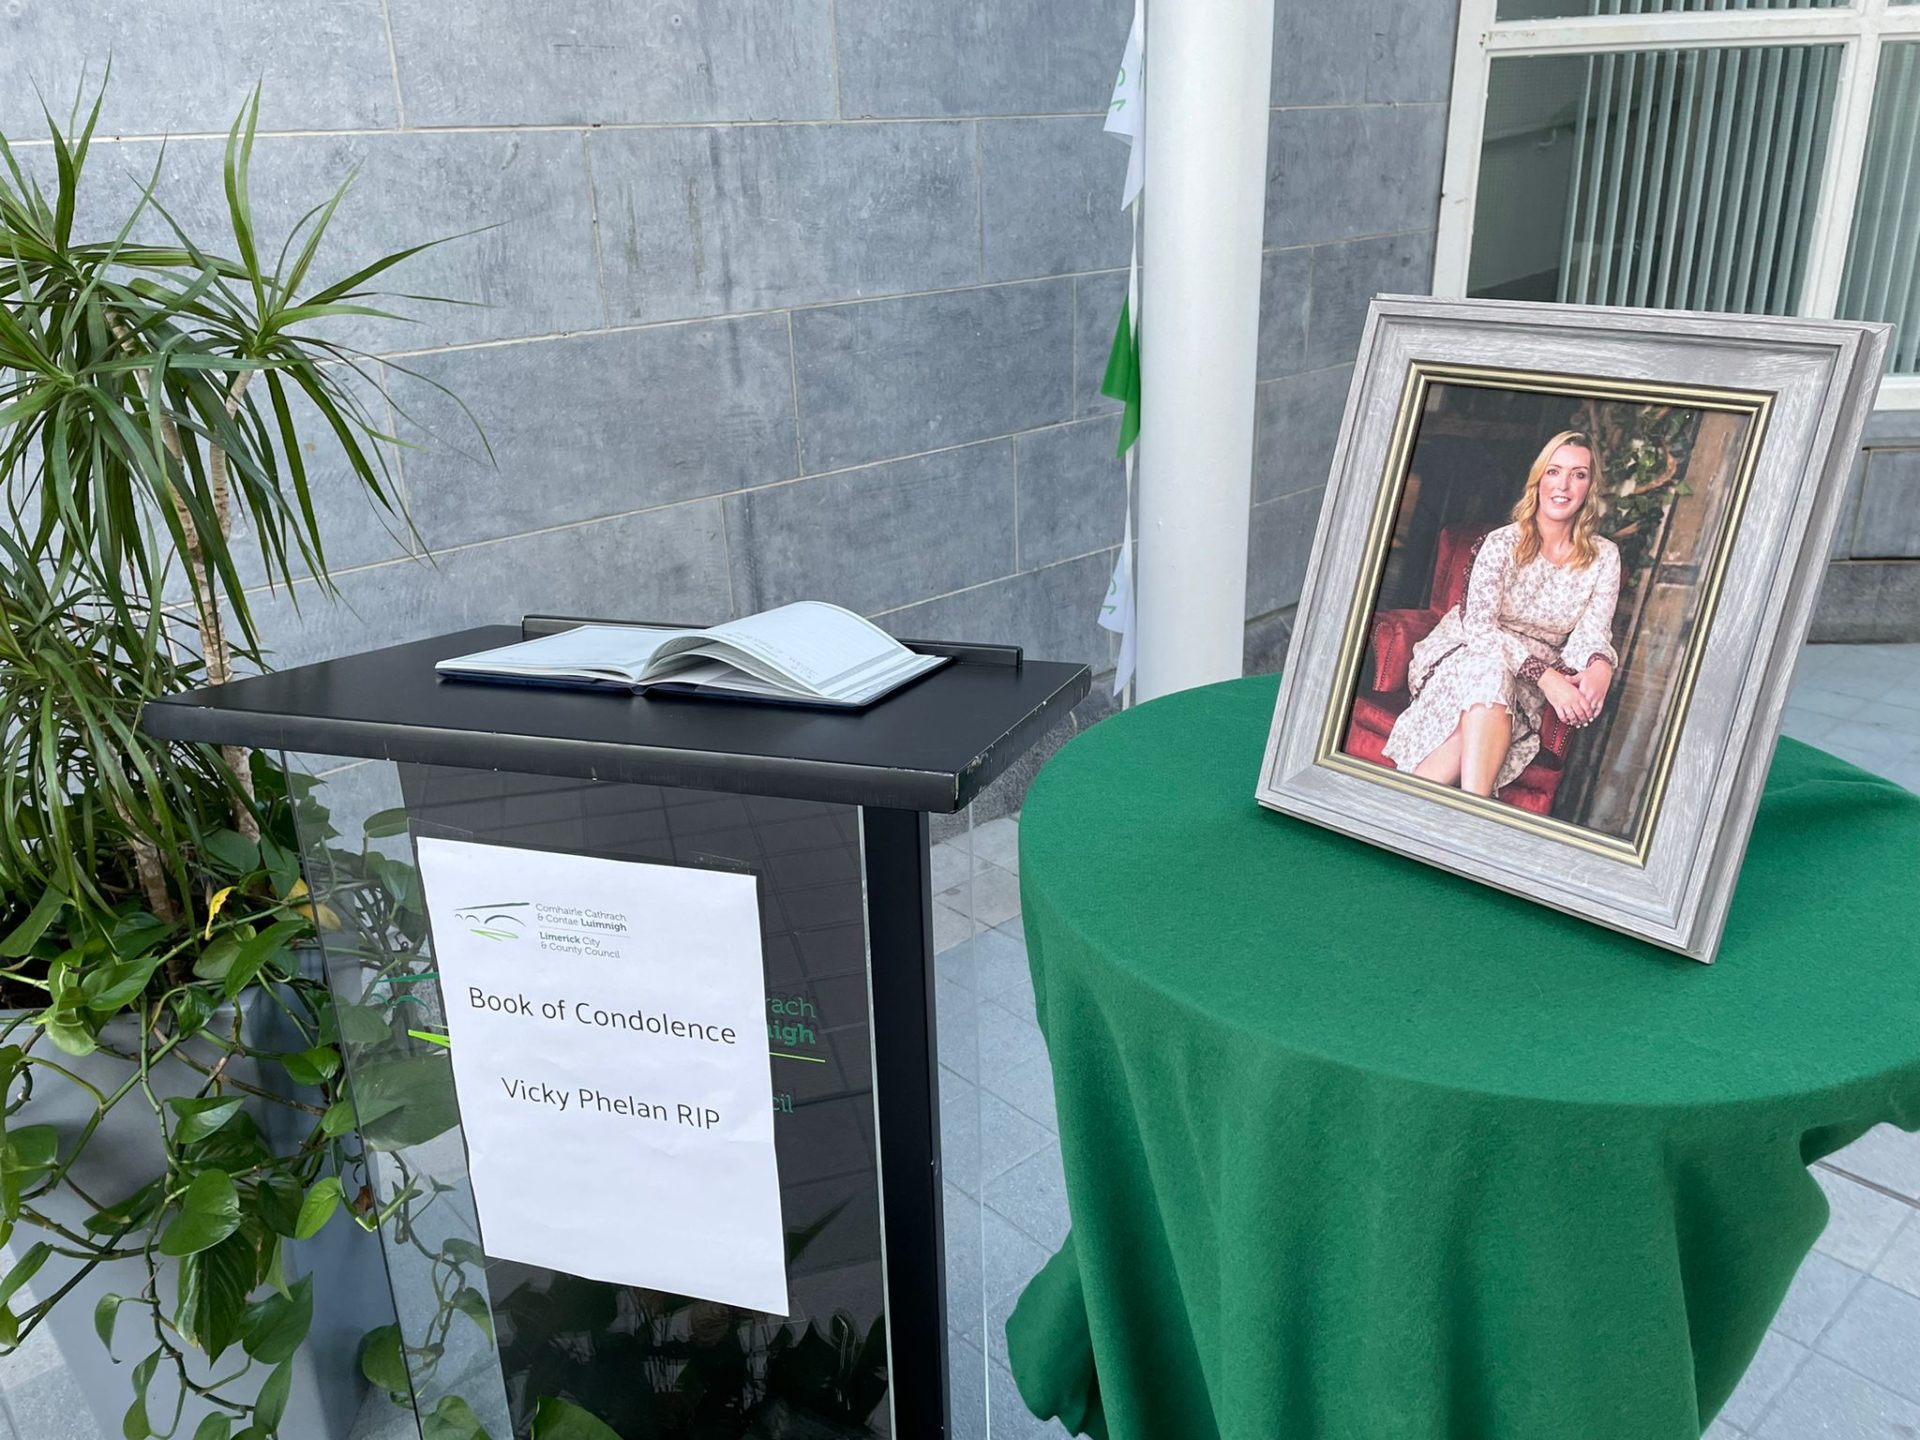 A book of condolence for Vicky Phelan in Co Limerick